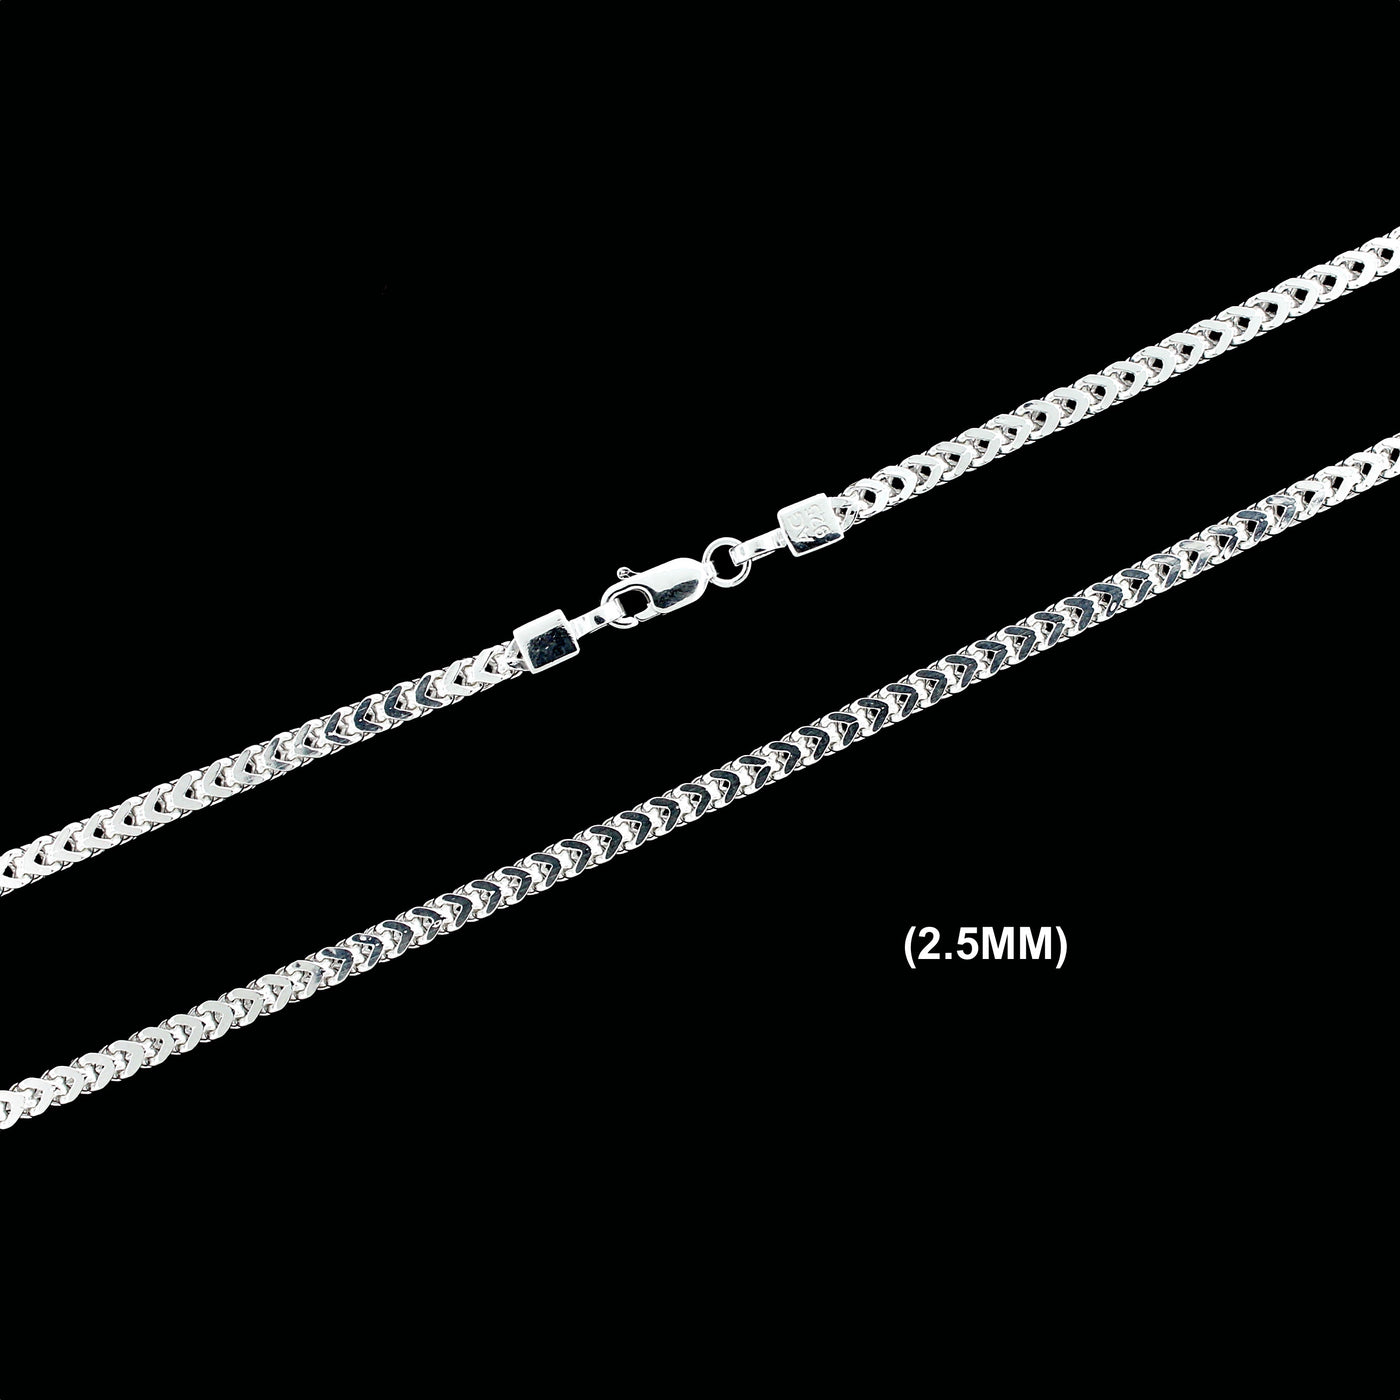 2.5MM Solid 925 Sterling Silver Franco Link Chain Necklace or Bracelet ITALY